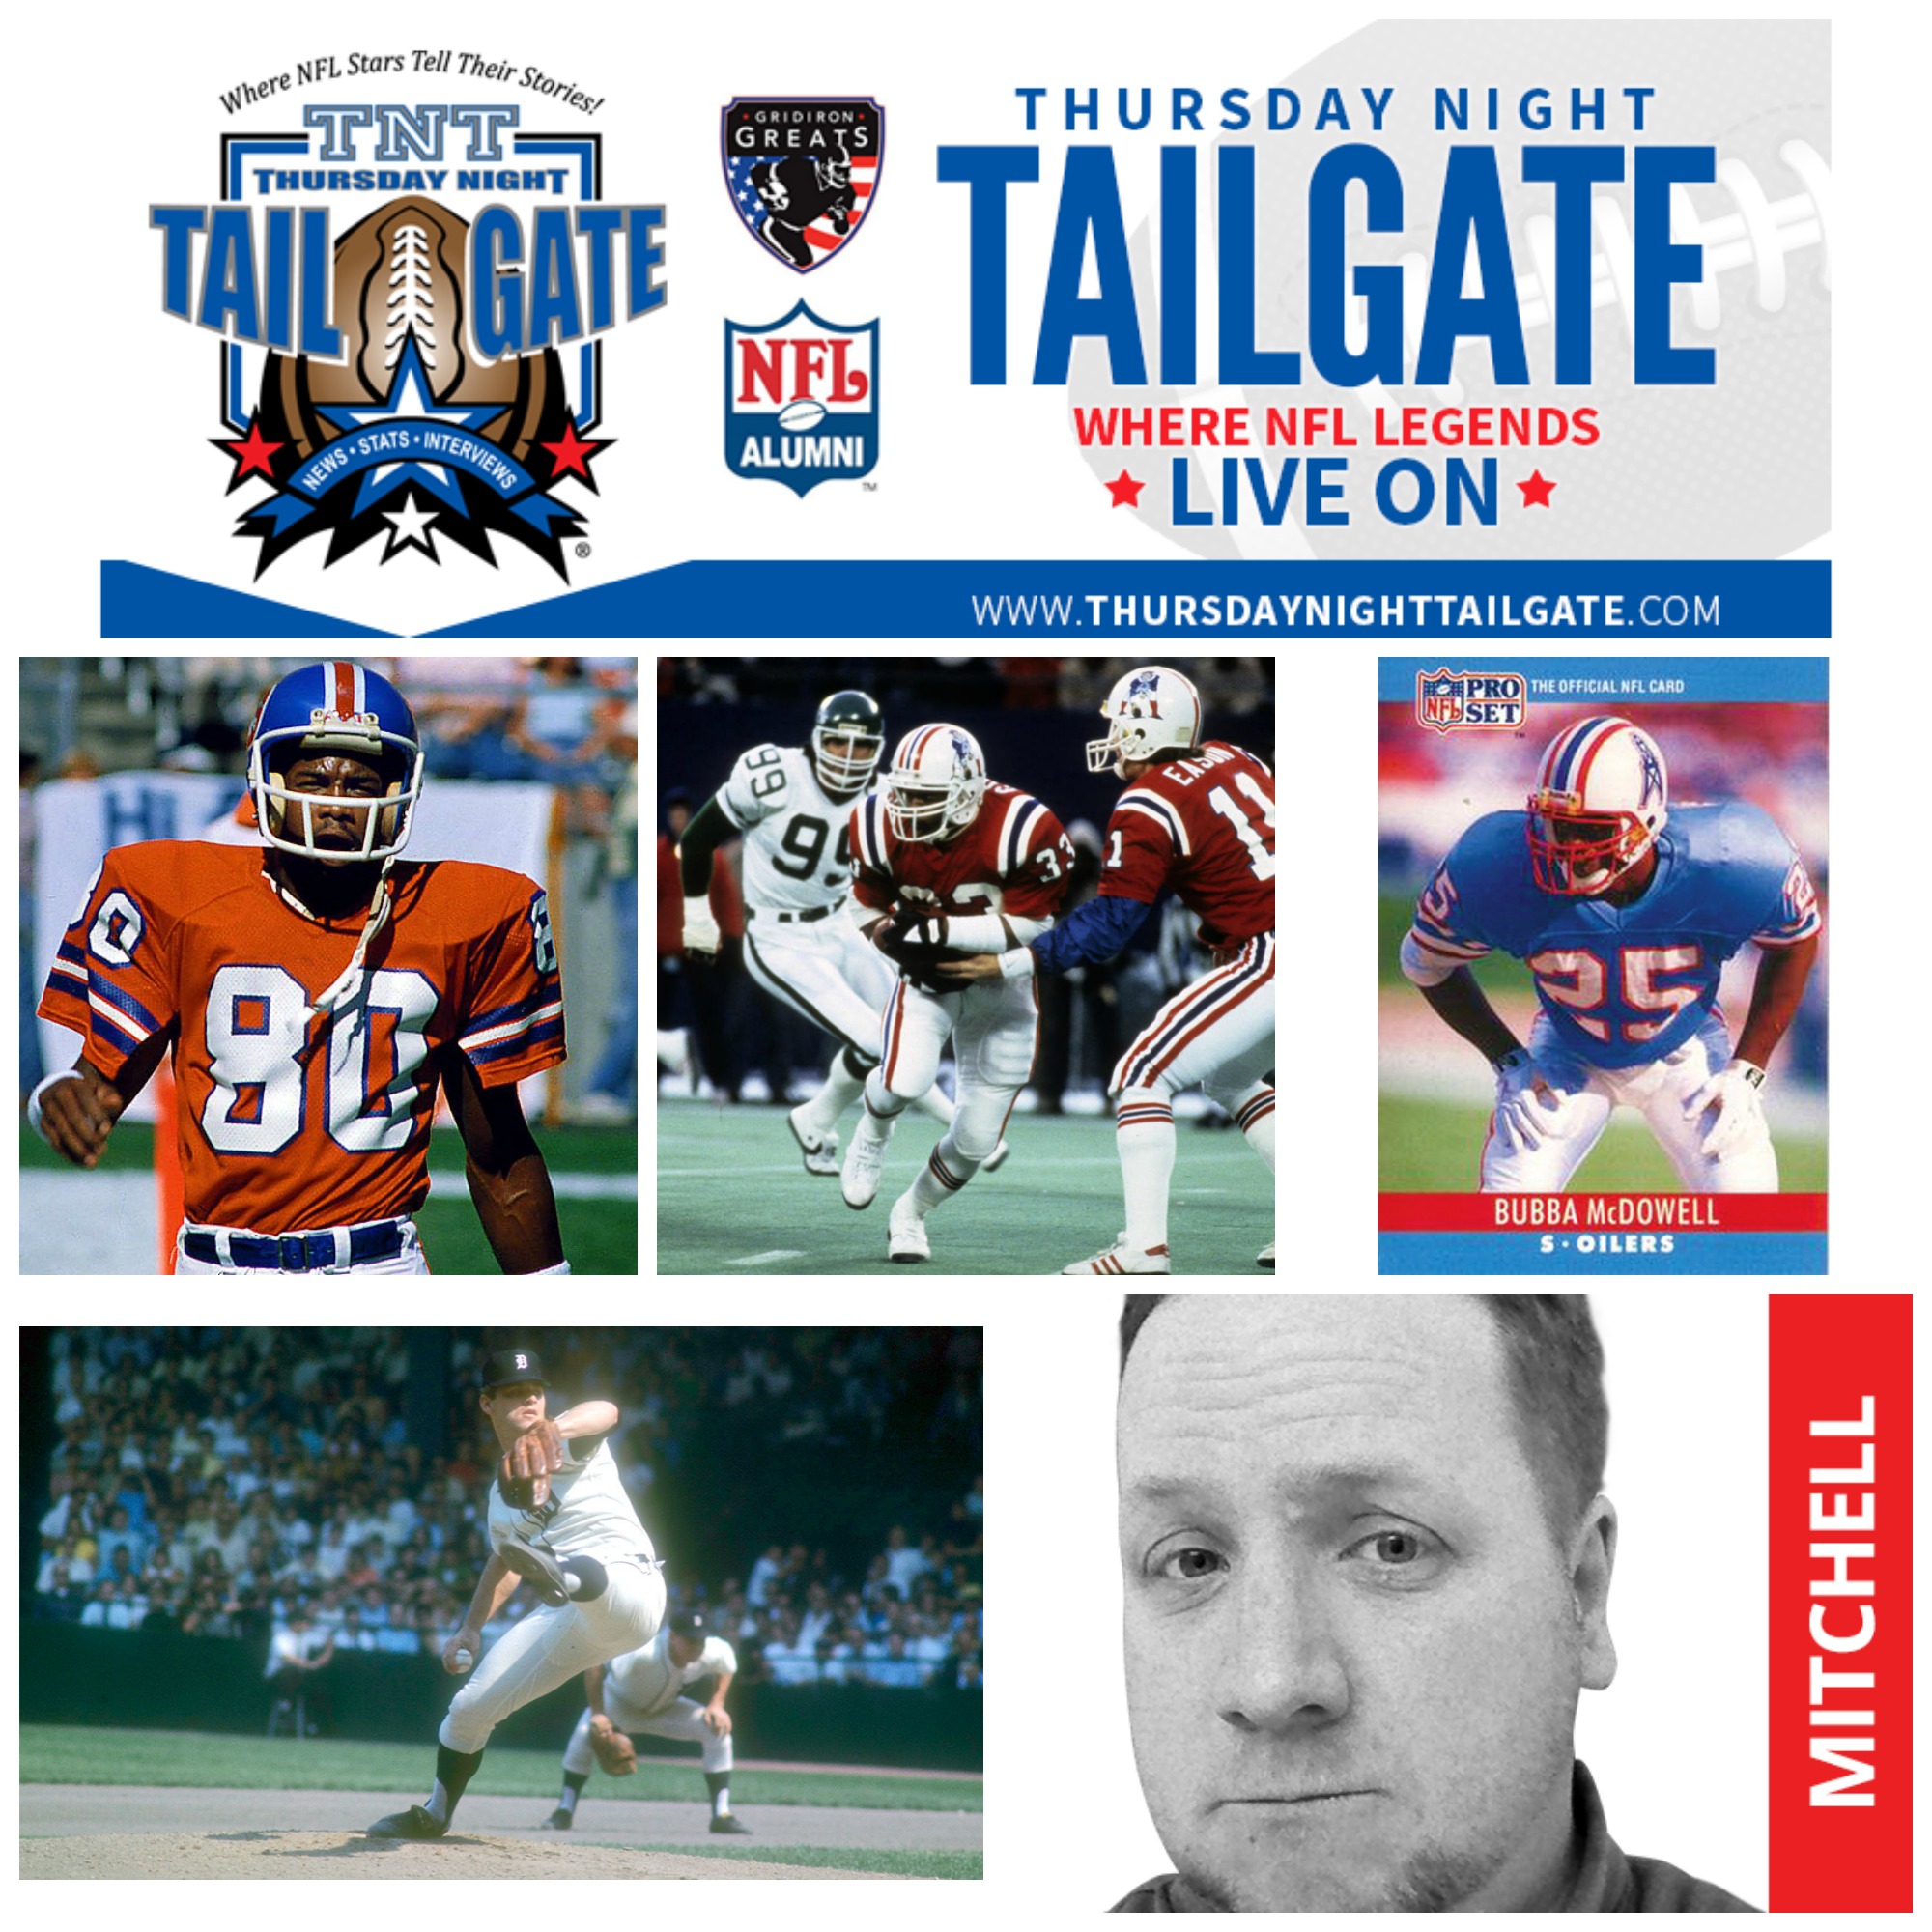 Rick Upchurch, Tony Collins, Bubba McDowell, Denny McLain, and Chris Mitchell join us on this edition of Thursday Night Tailgate NFL Podcast